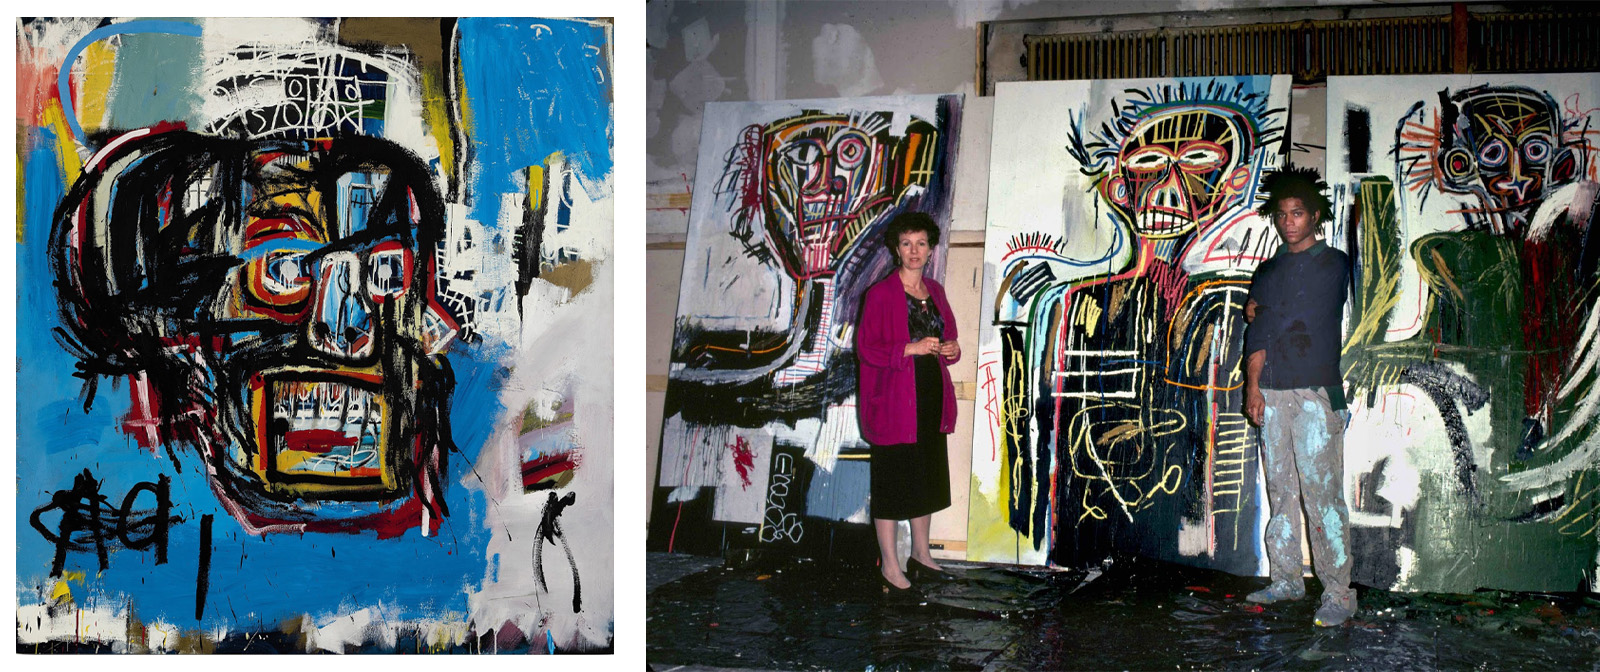 Creativity in a drug-fueled frenzy. Extravagant paintings by Jean Michel Basquiat, now worth millions of dollars.